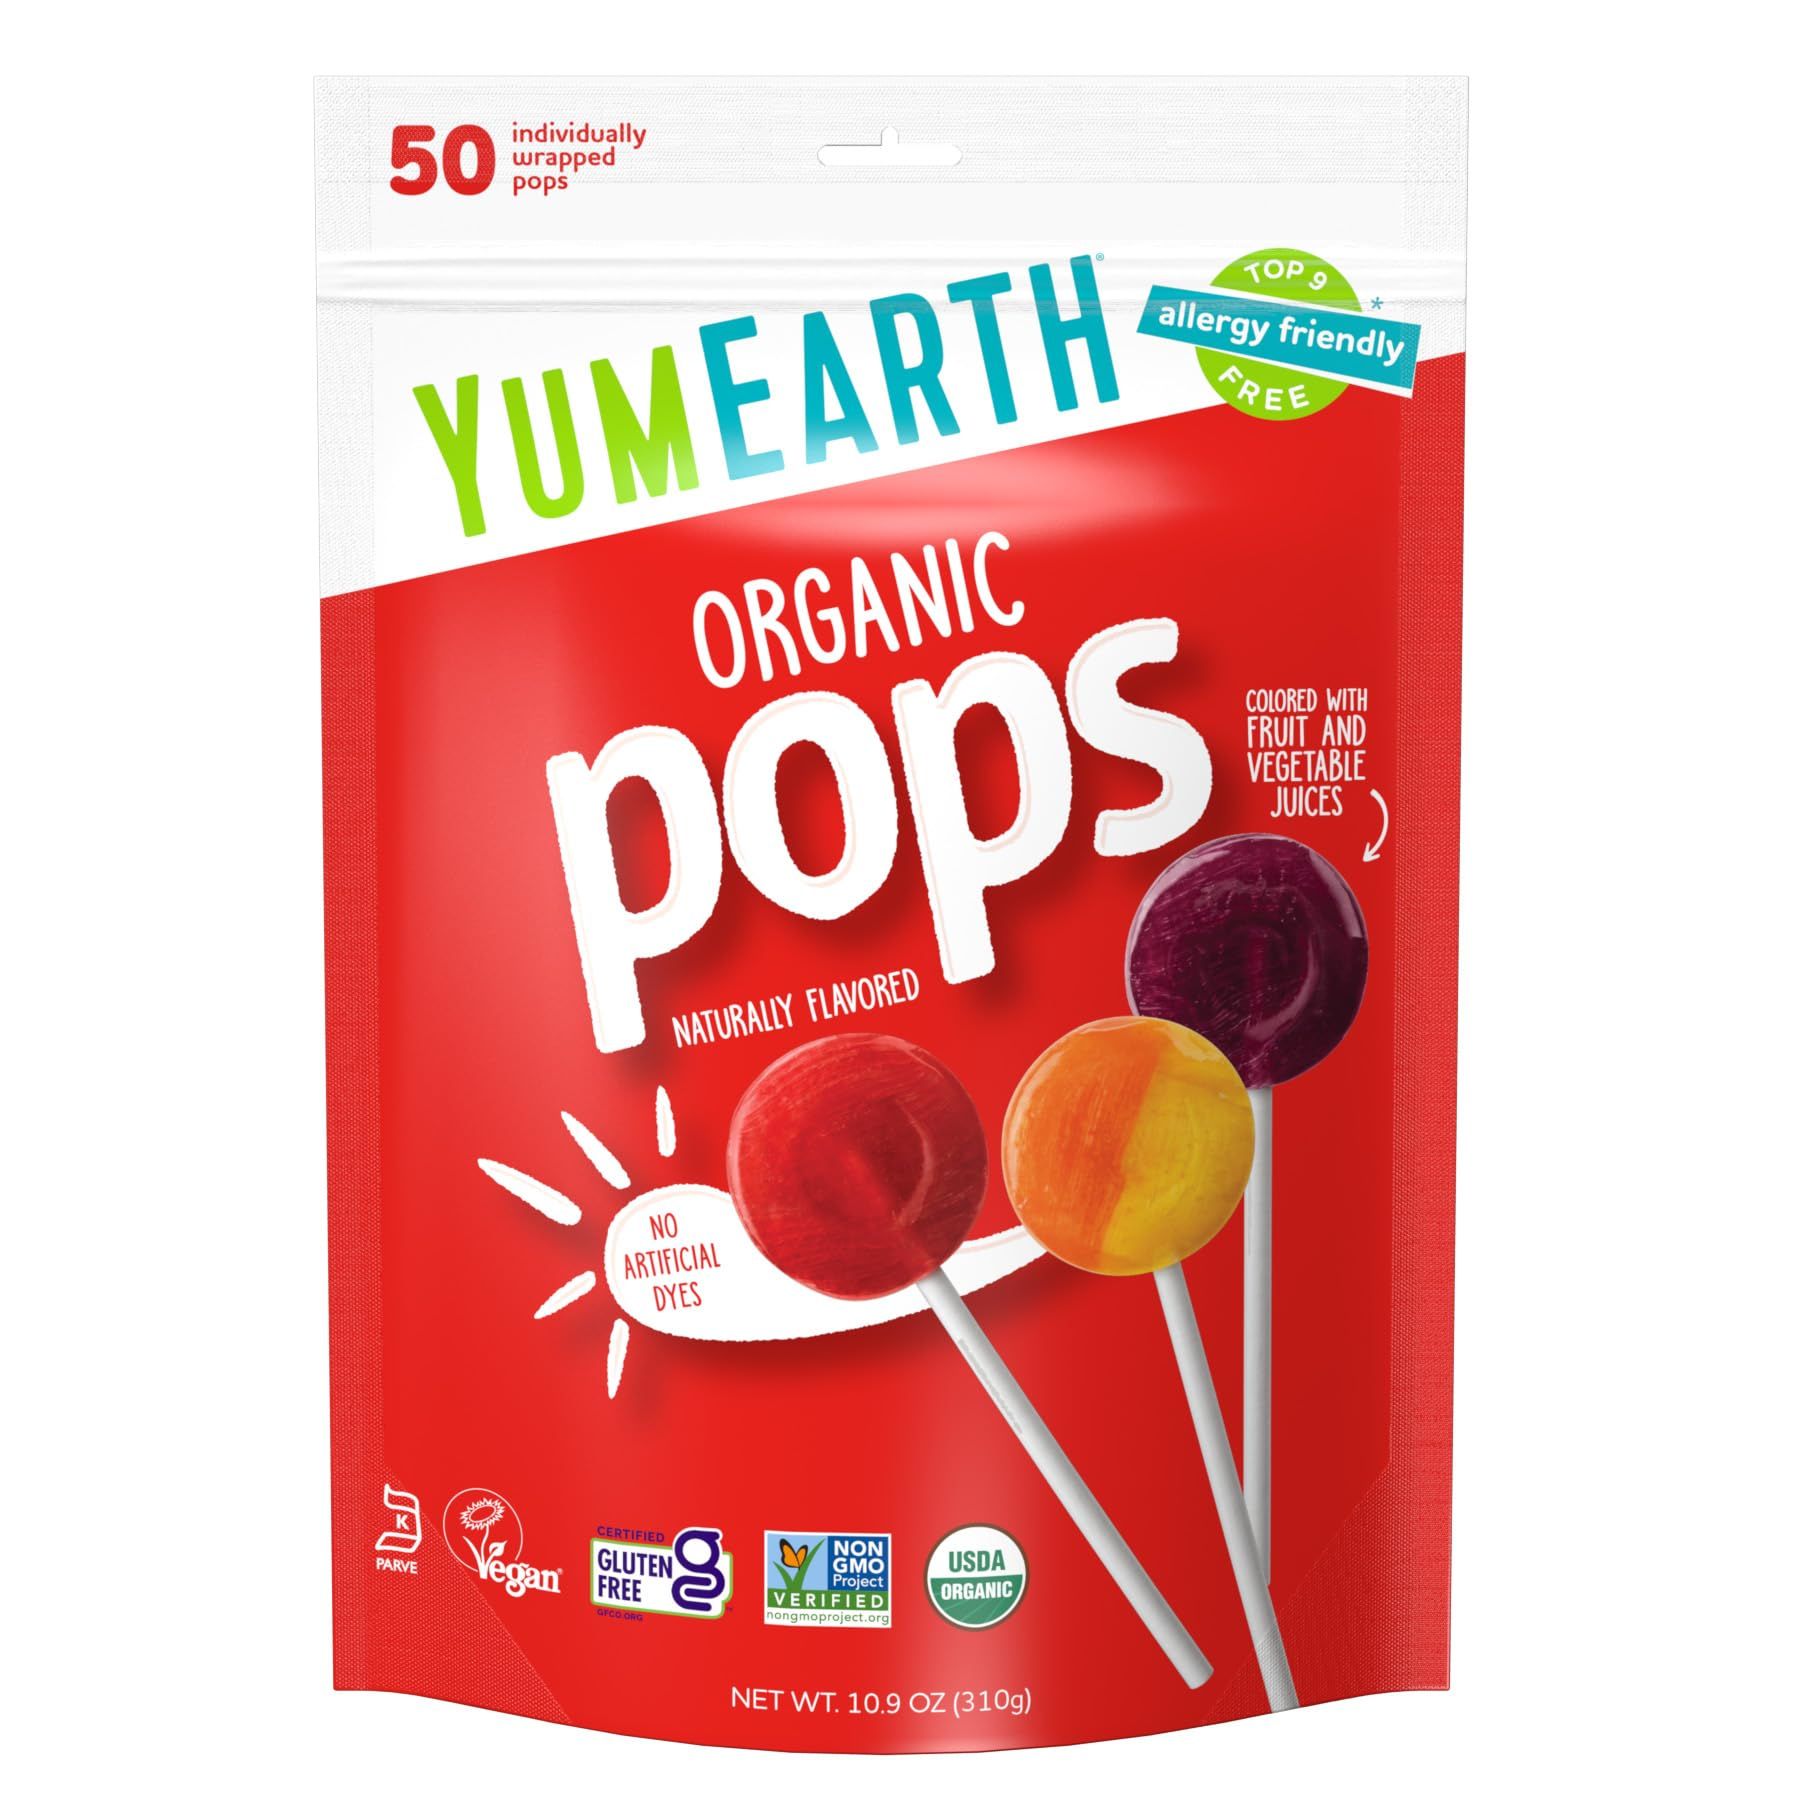 11 dye-free candies that comply with the 'Skittles Ban